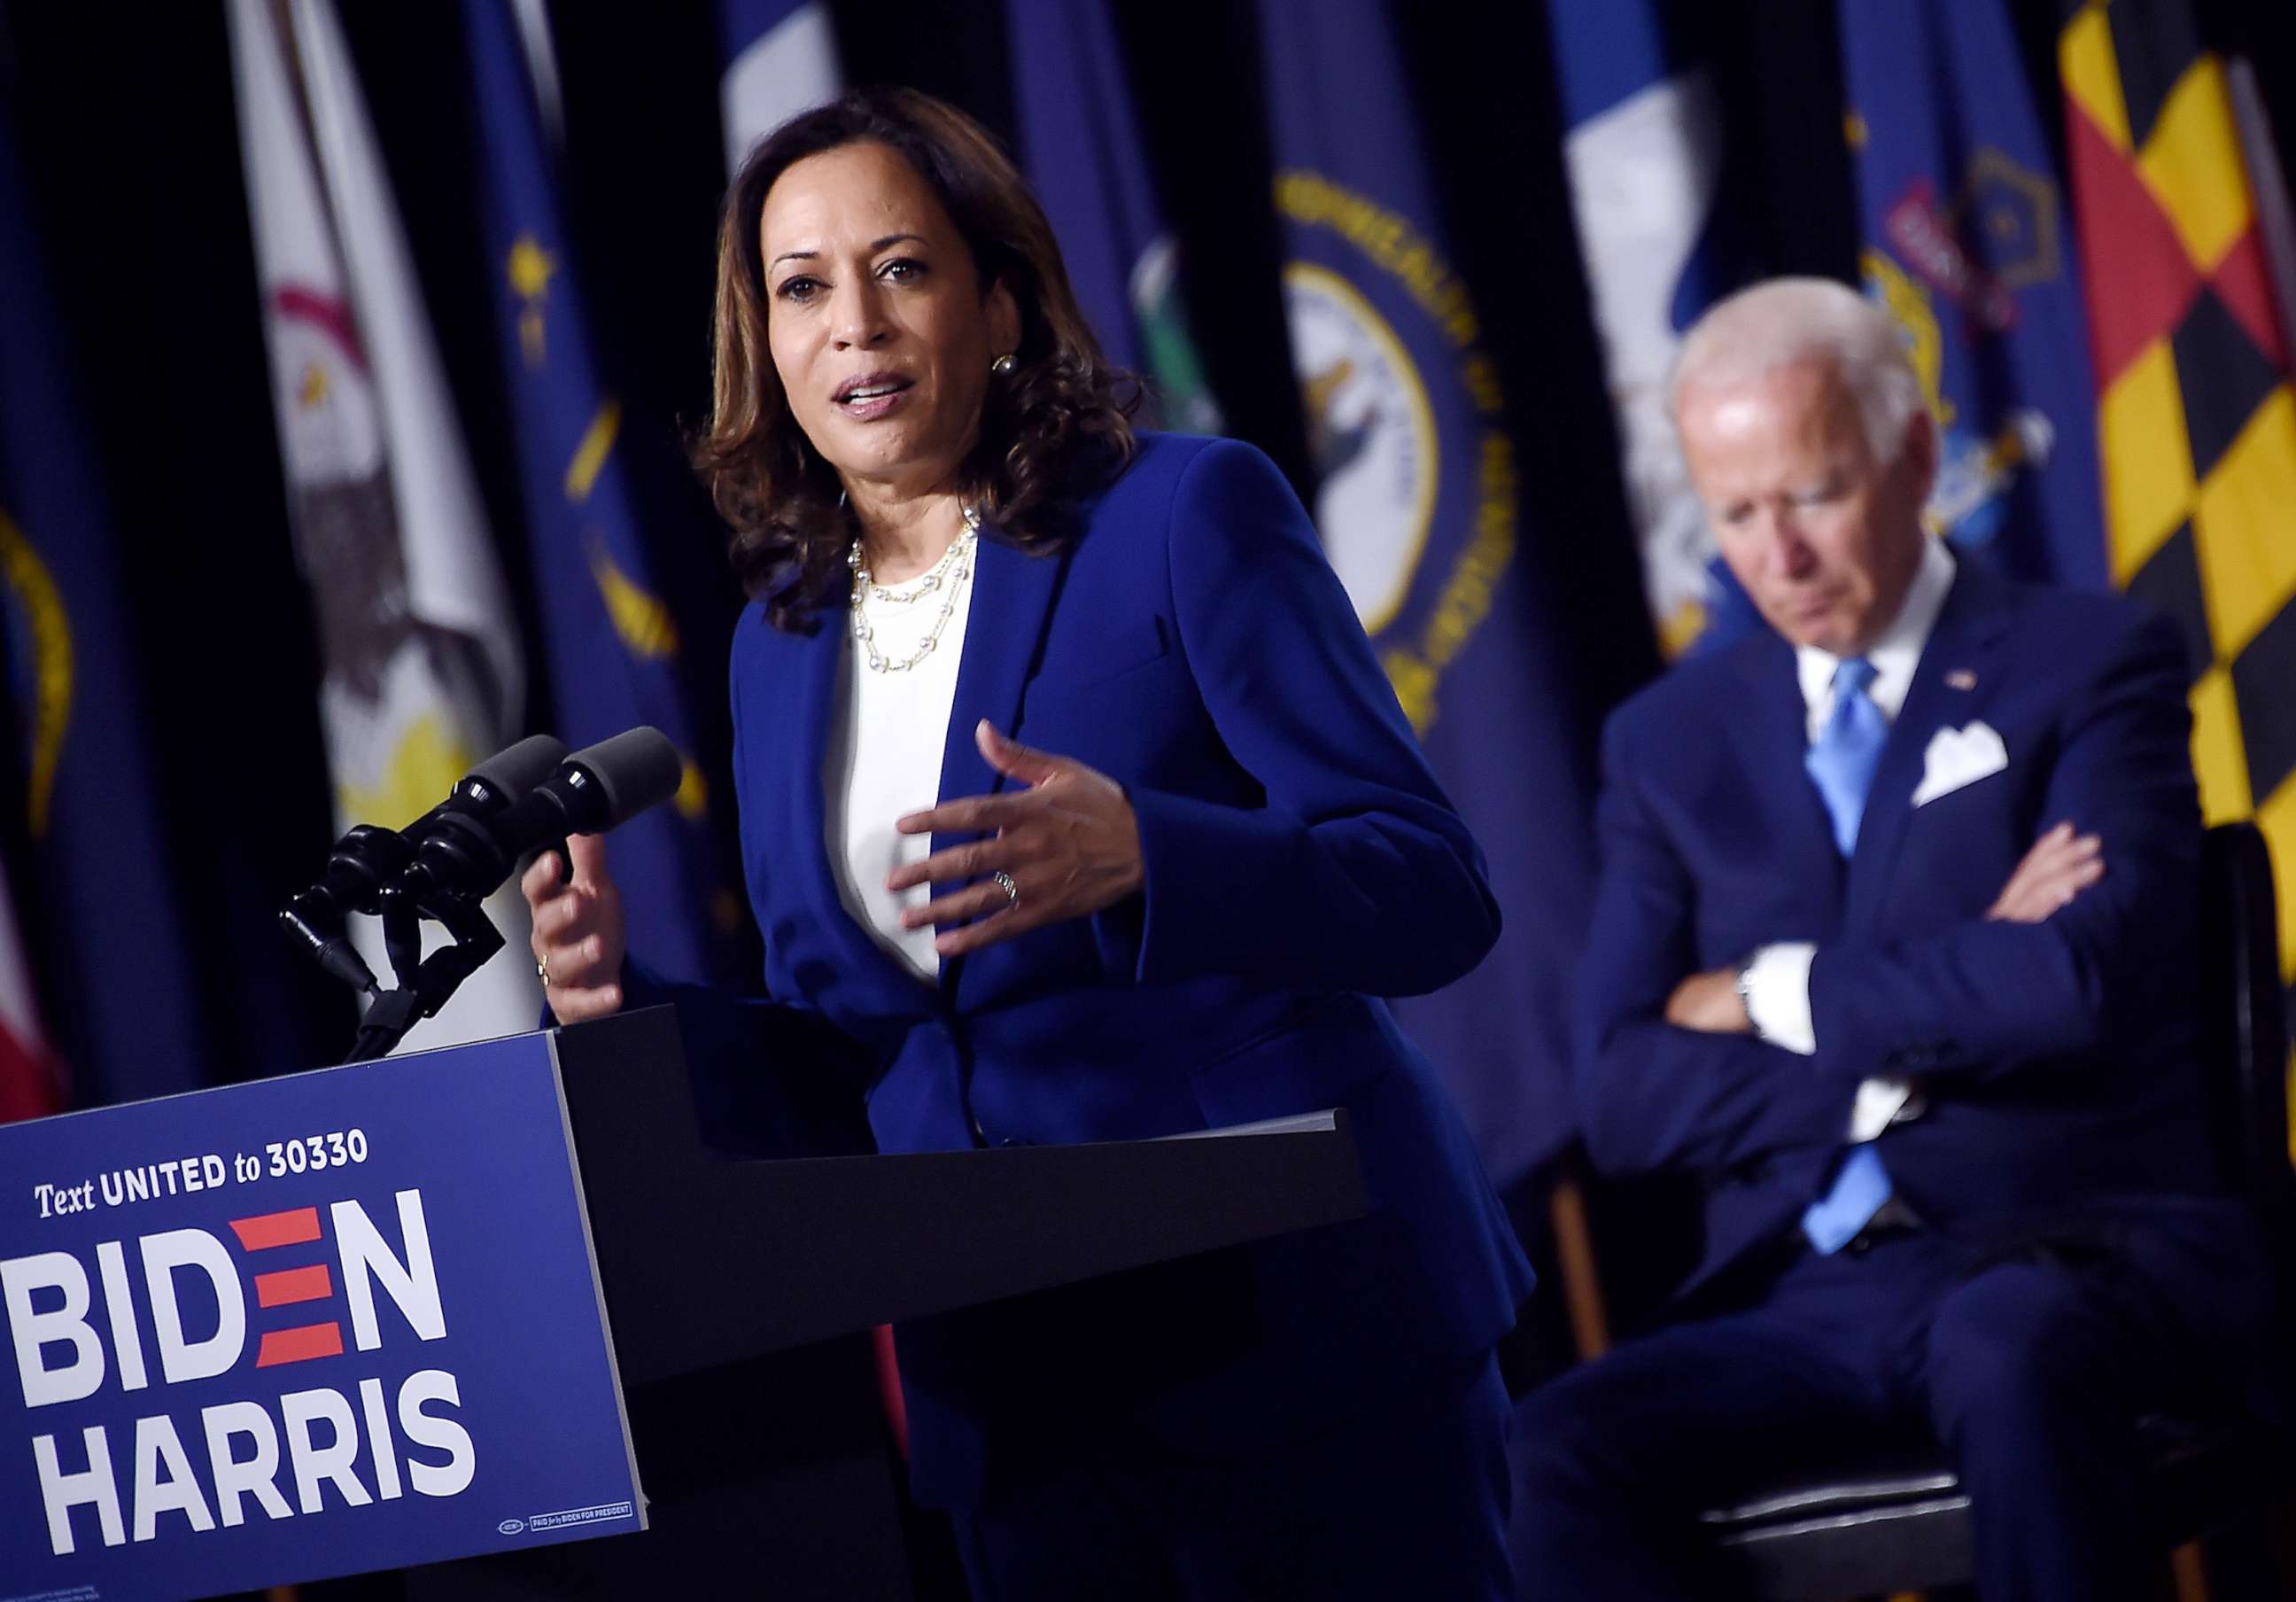 PHOTO: Democratic presidential nominee and former Vice President Joe Biden listen to his vice presidential running mate, Senator Kamala Harris, speak during their first press conference together in Wilmington, Del., Aug. 12, 2020.